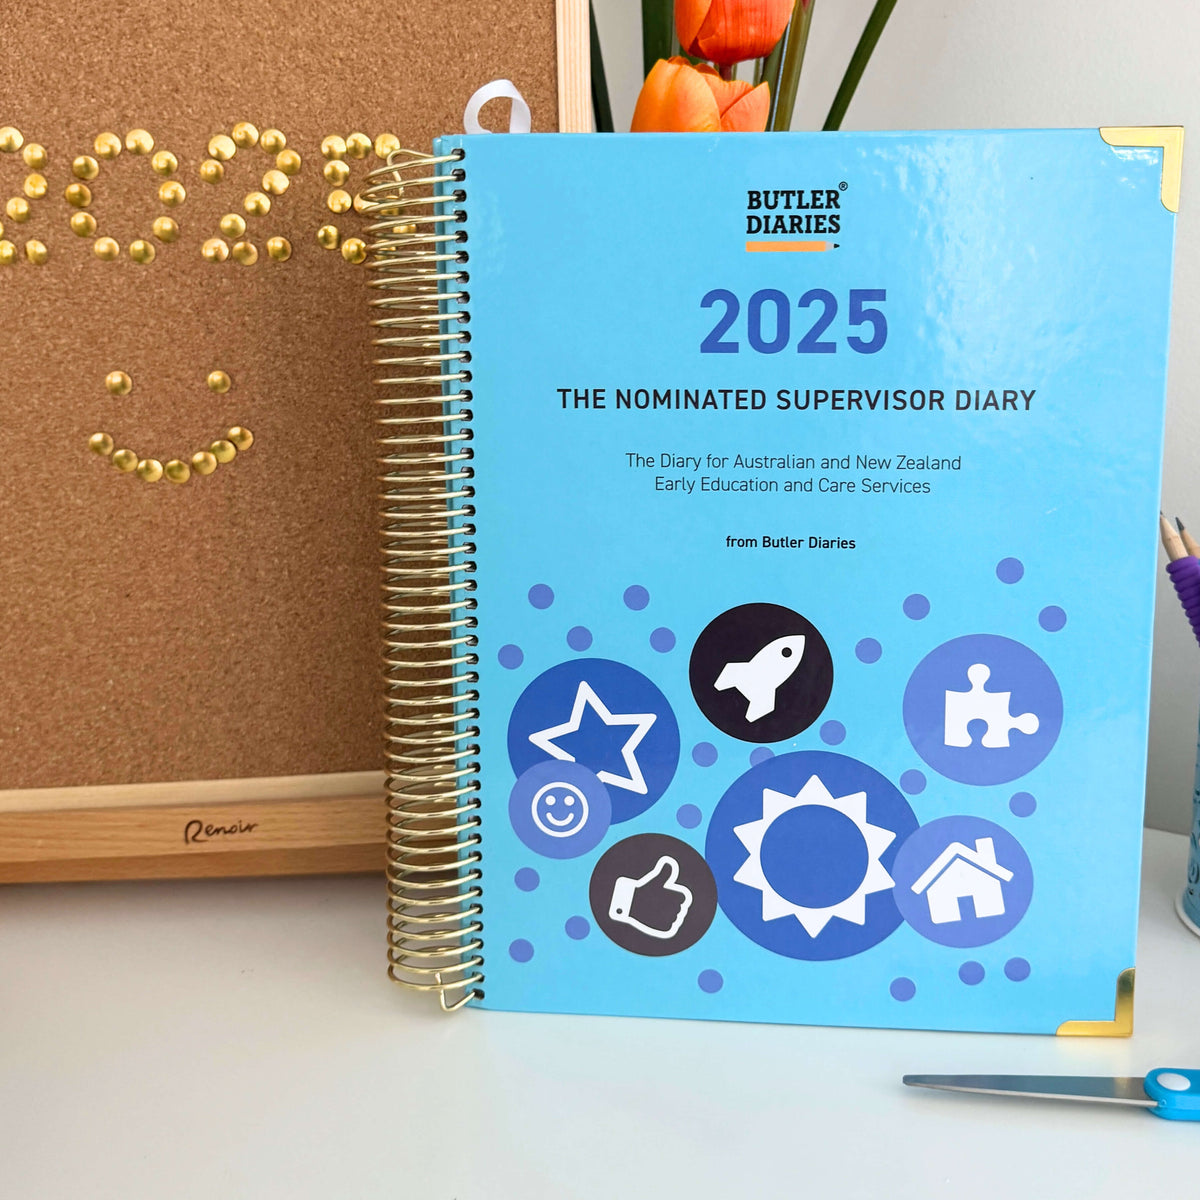 2025 Nominated Supervisor Diary - Hard Cover Spiral Bound